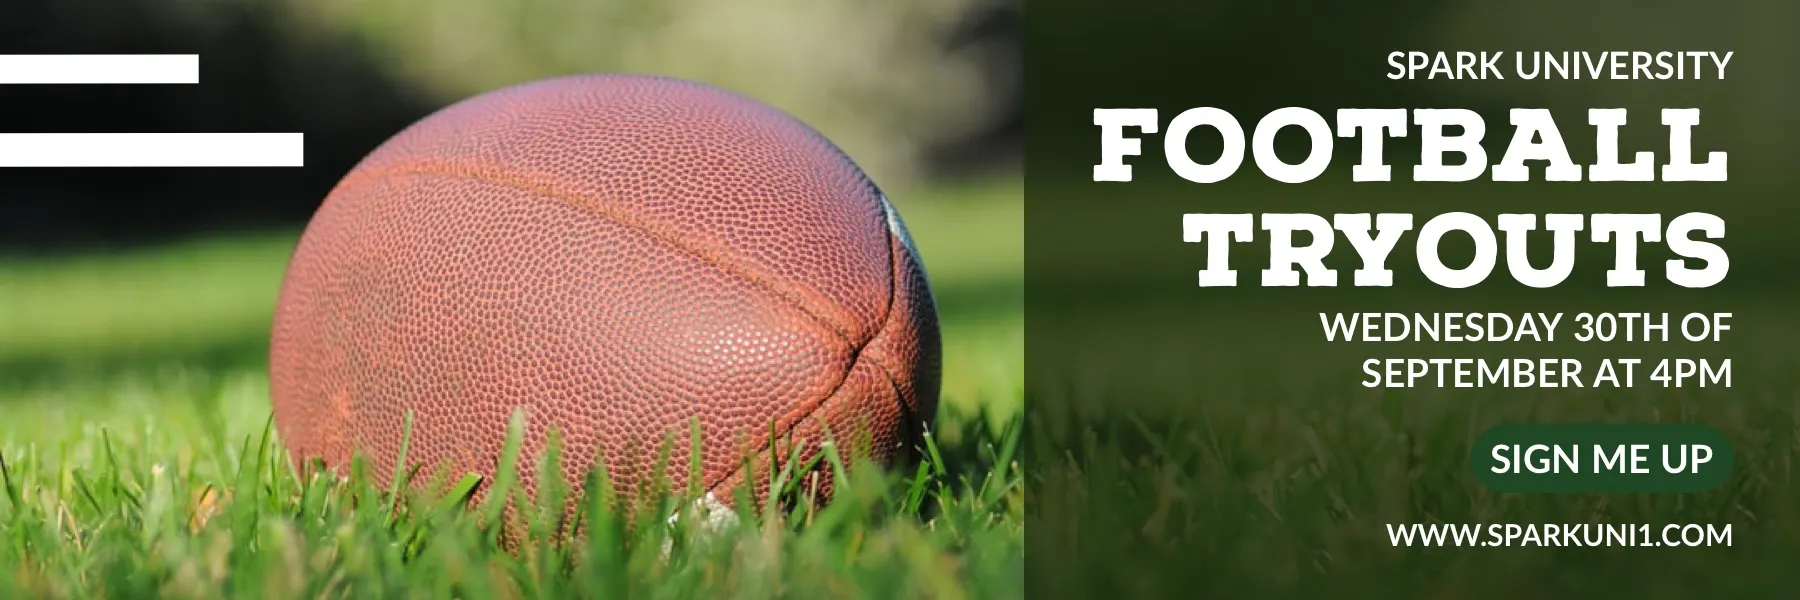 Light Toned Football Tryout Event Ad Facebook Banner